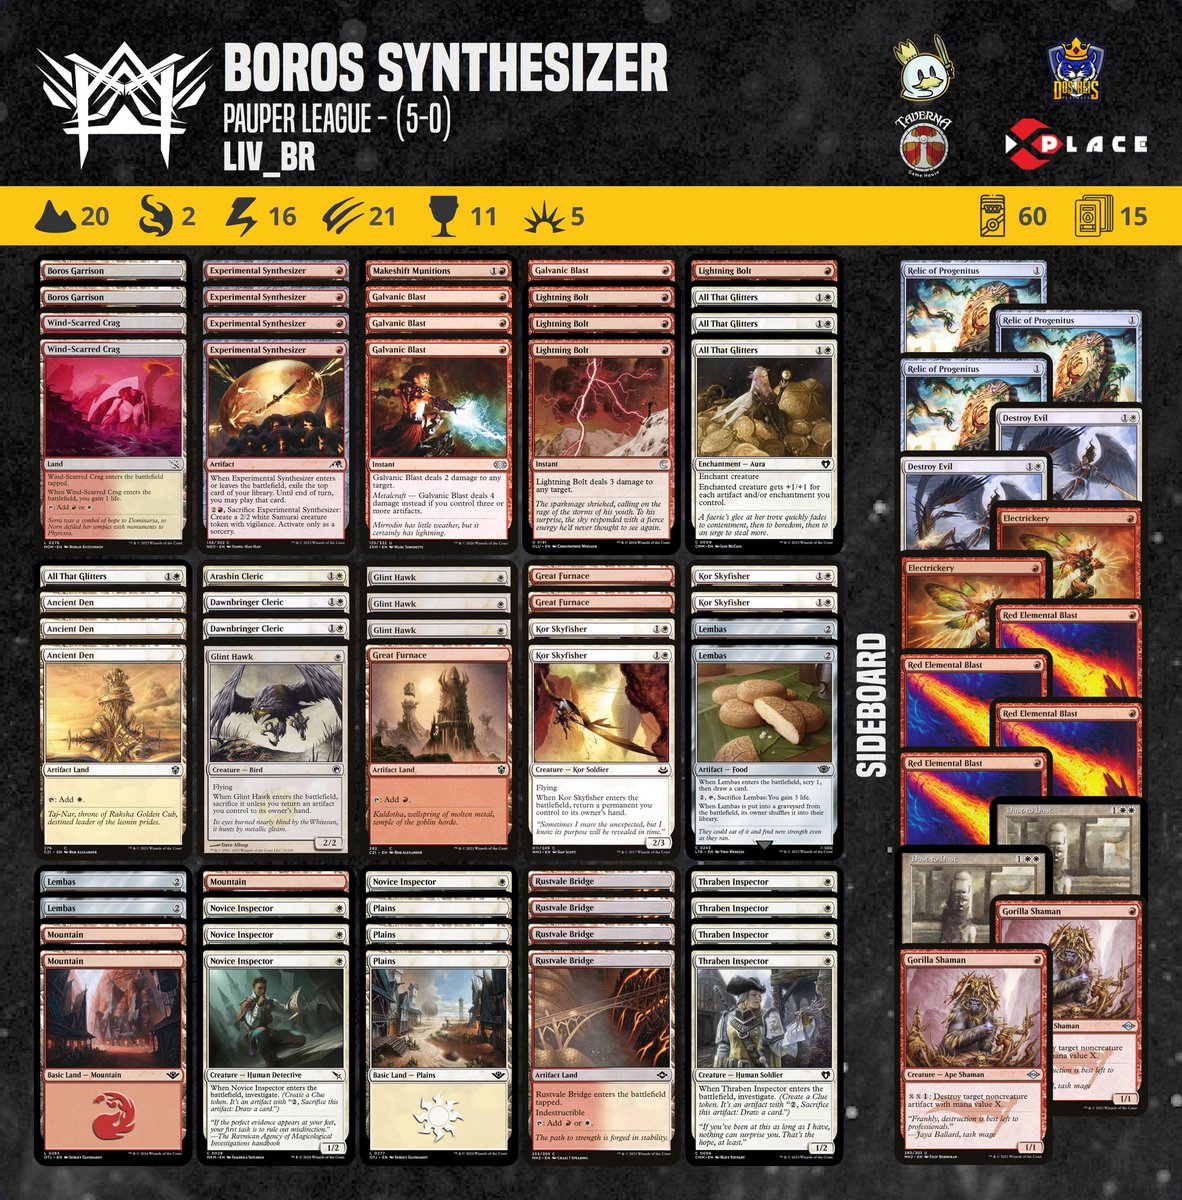 Our athlete Liv_BR achieved a 5-0 victory in the Pauper League tournament with this Boros Synthesizer decklist.

#pauper  #magic #mtgcommon #metagamepauper #mtgpauper #magicthegathering #wizardsofthecoast 

@PauperDecklists @fireshoes